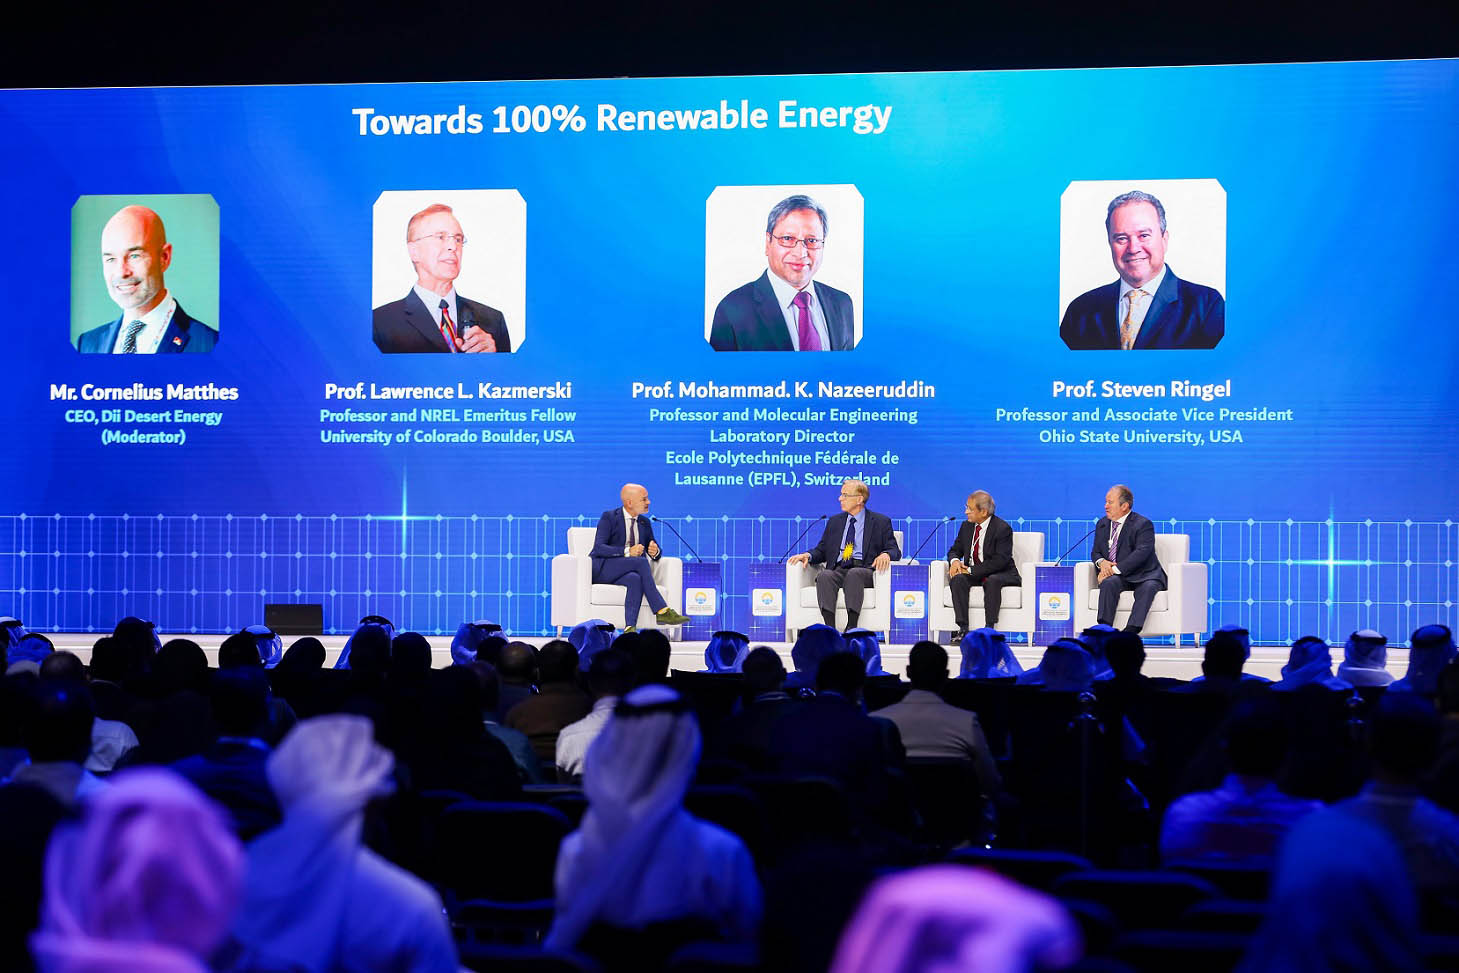 MENA Solar Conference highlights the latest innovations in solar energy technology that are shaping a sustainable future